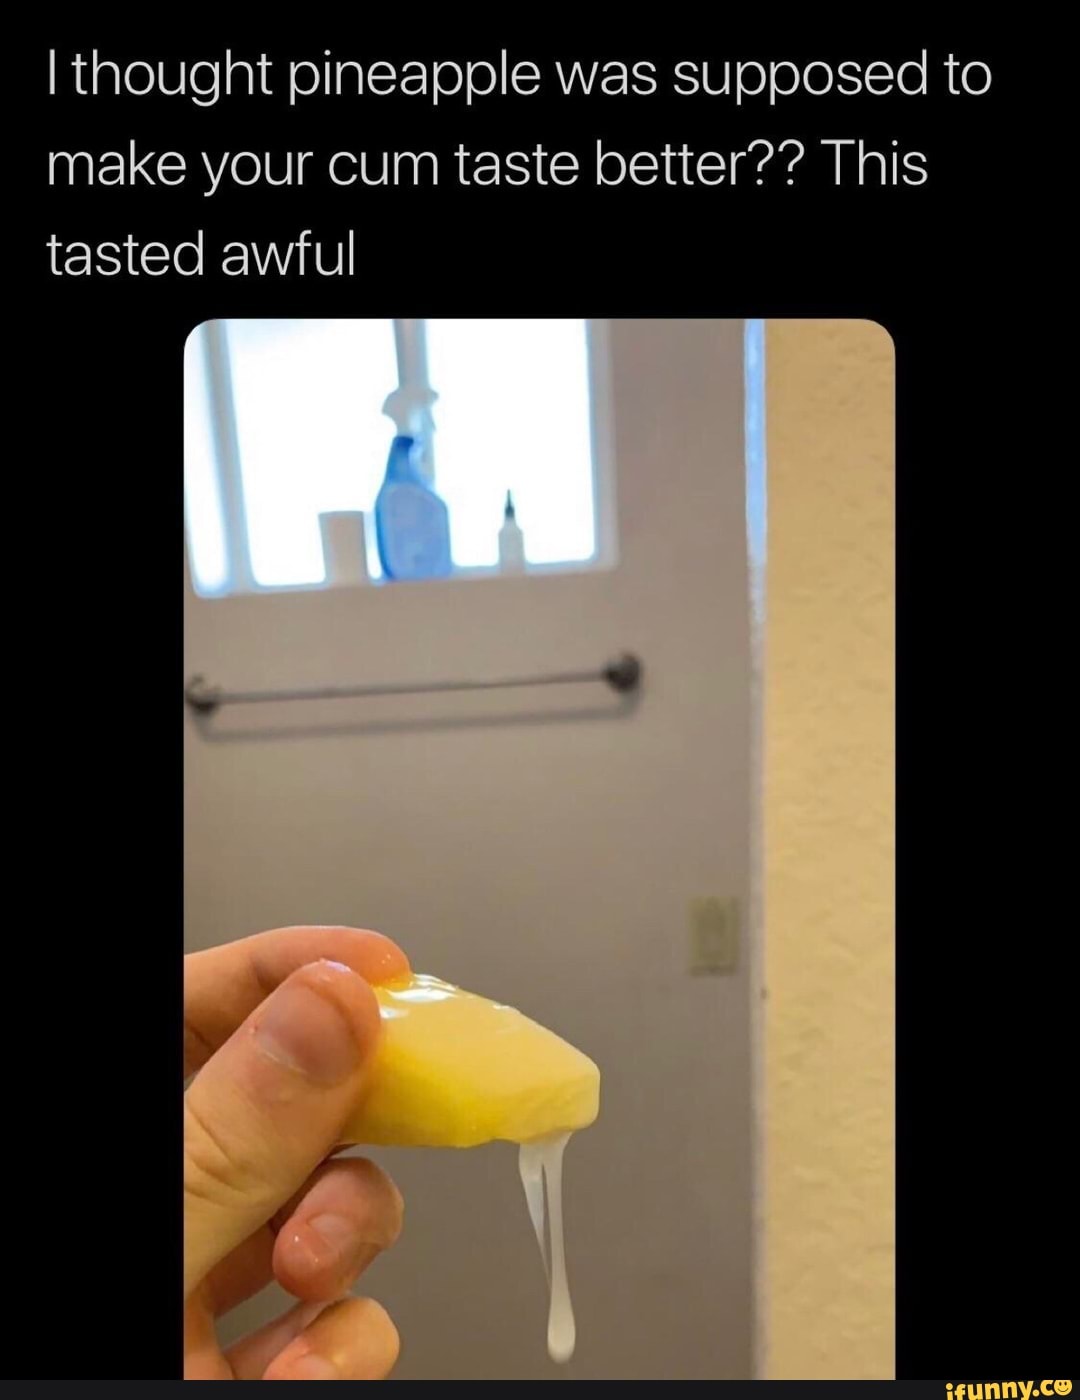 Ithought pineapple was supposed to make your cum taste better?? 